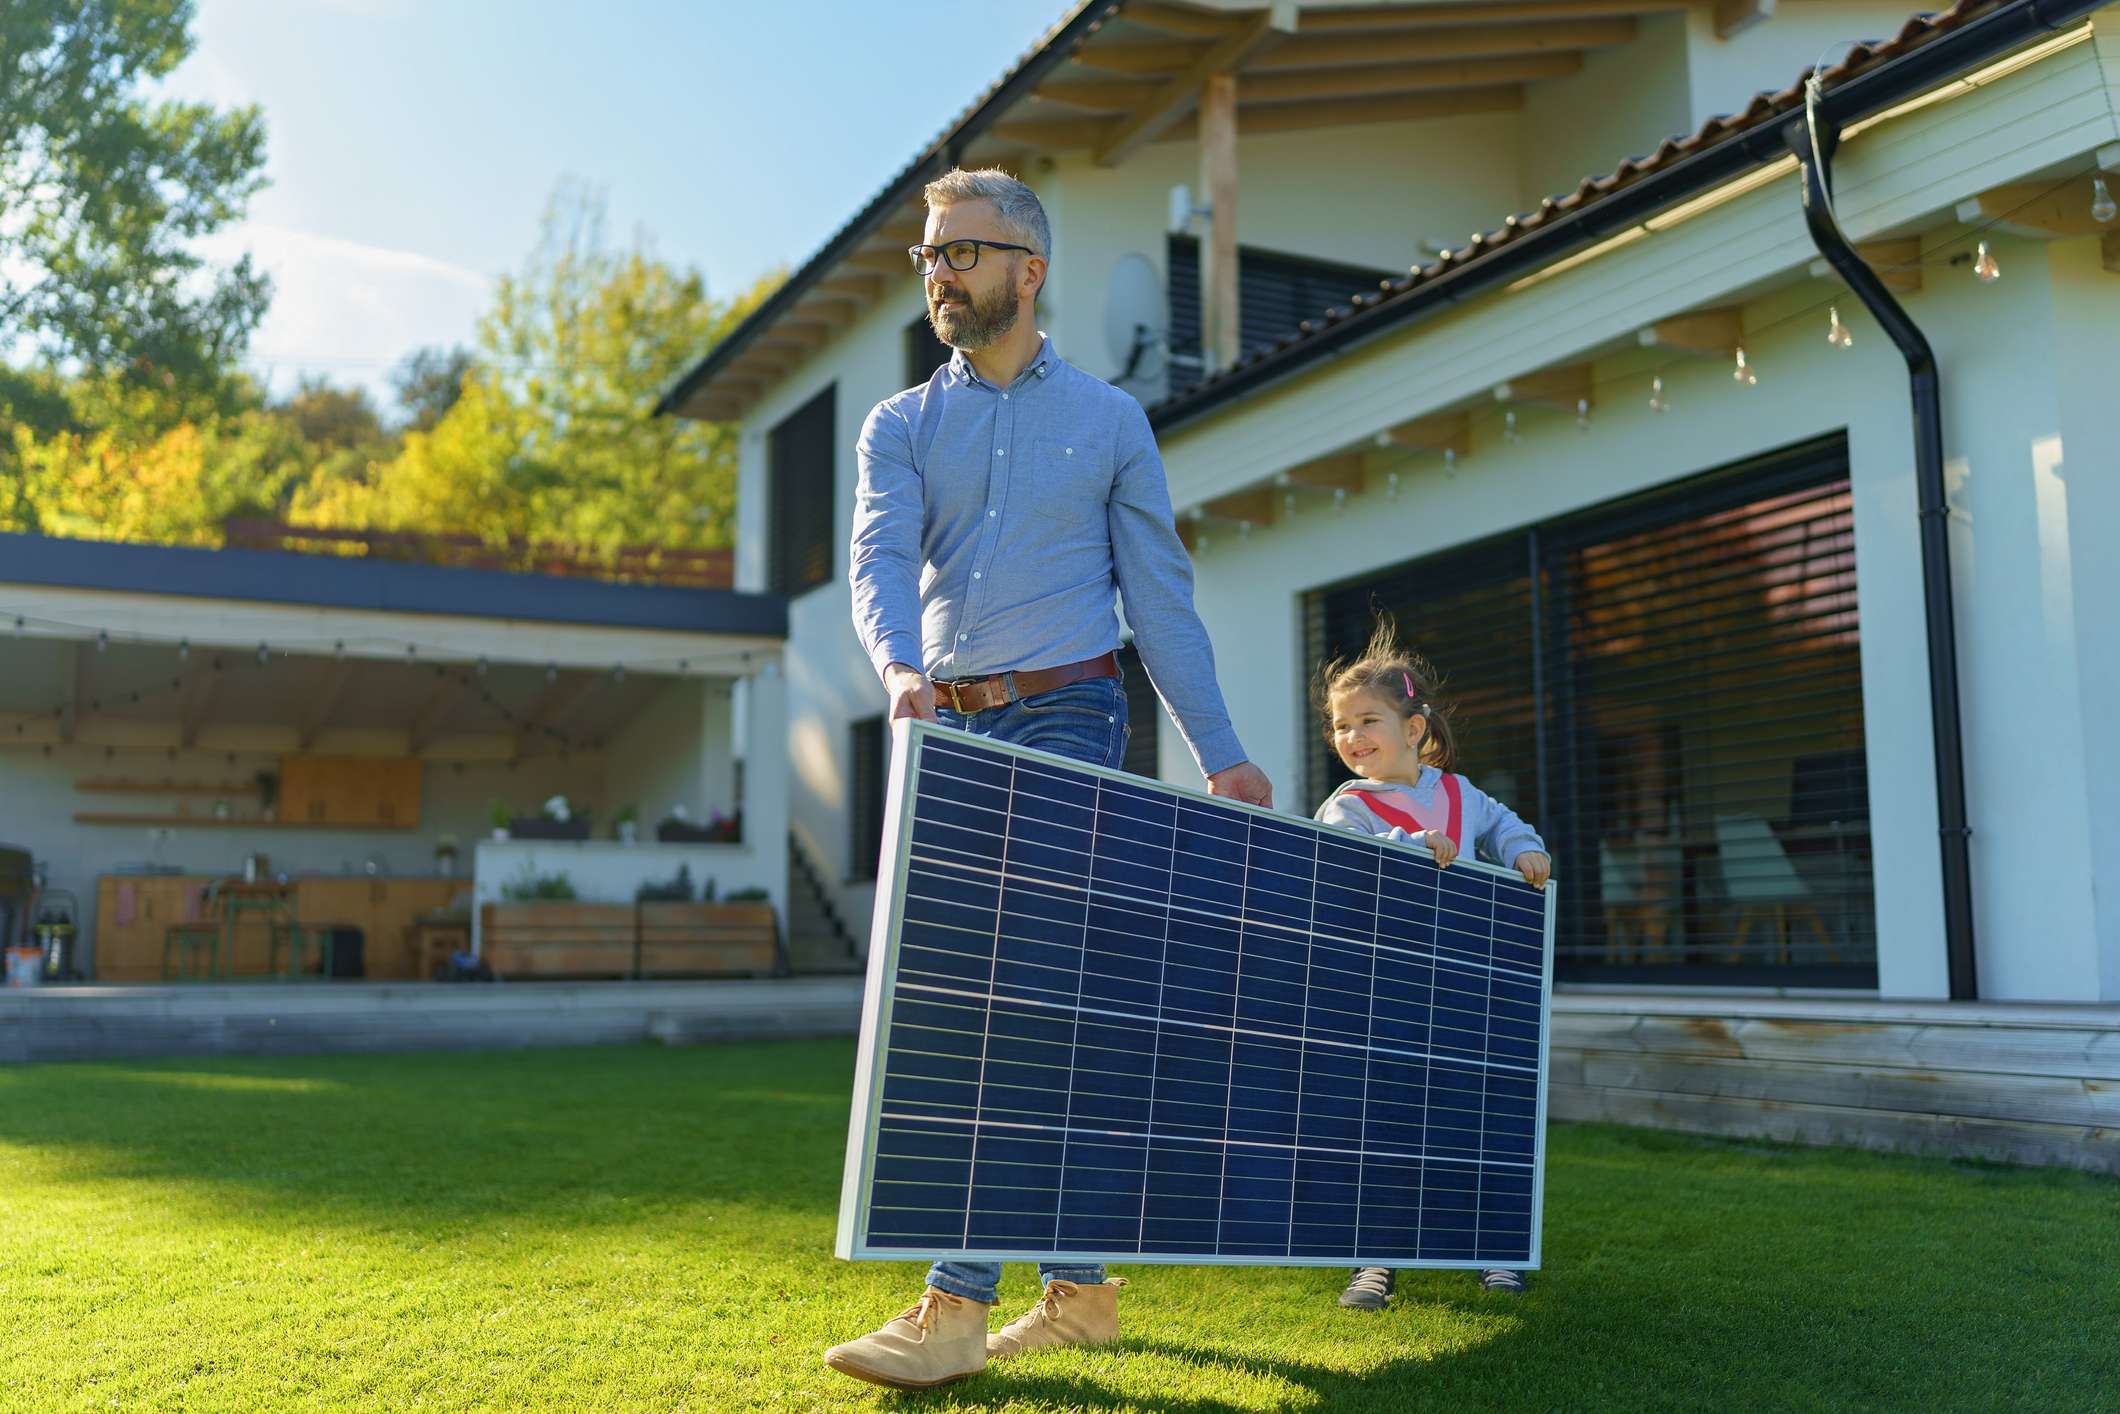 What Are the Options for Financing Solar?